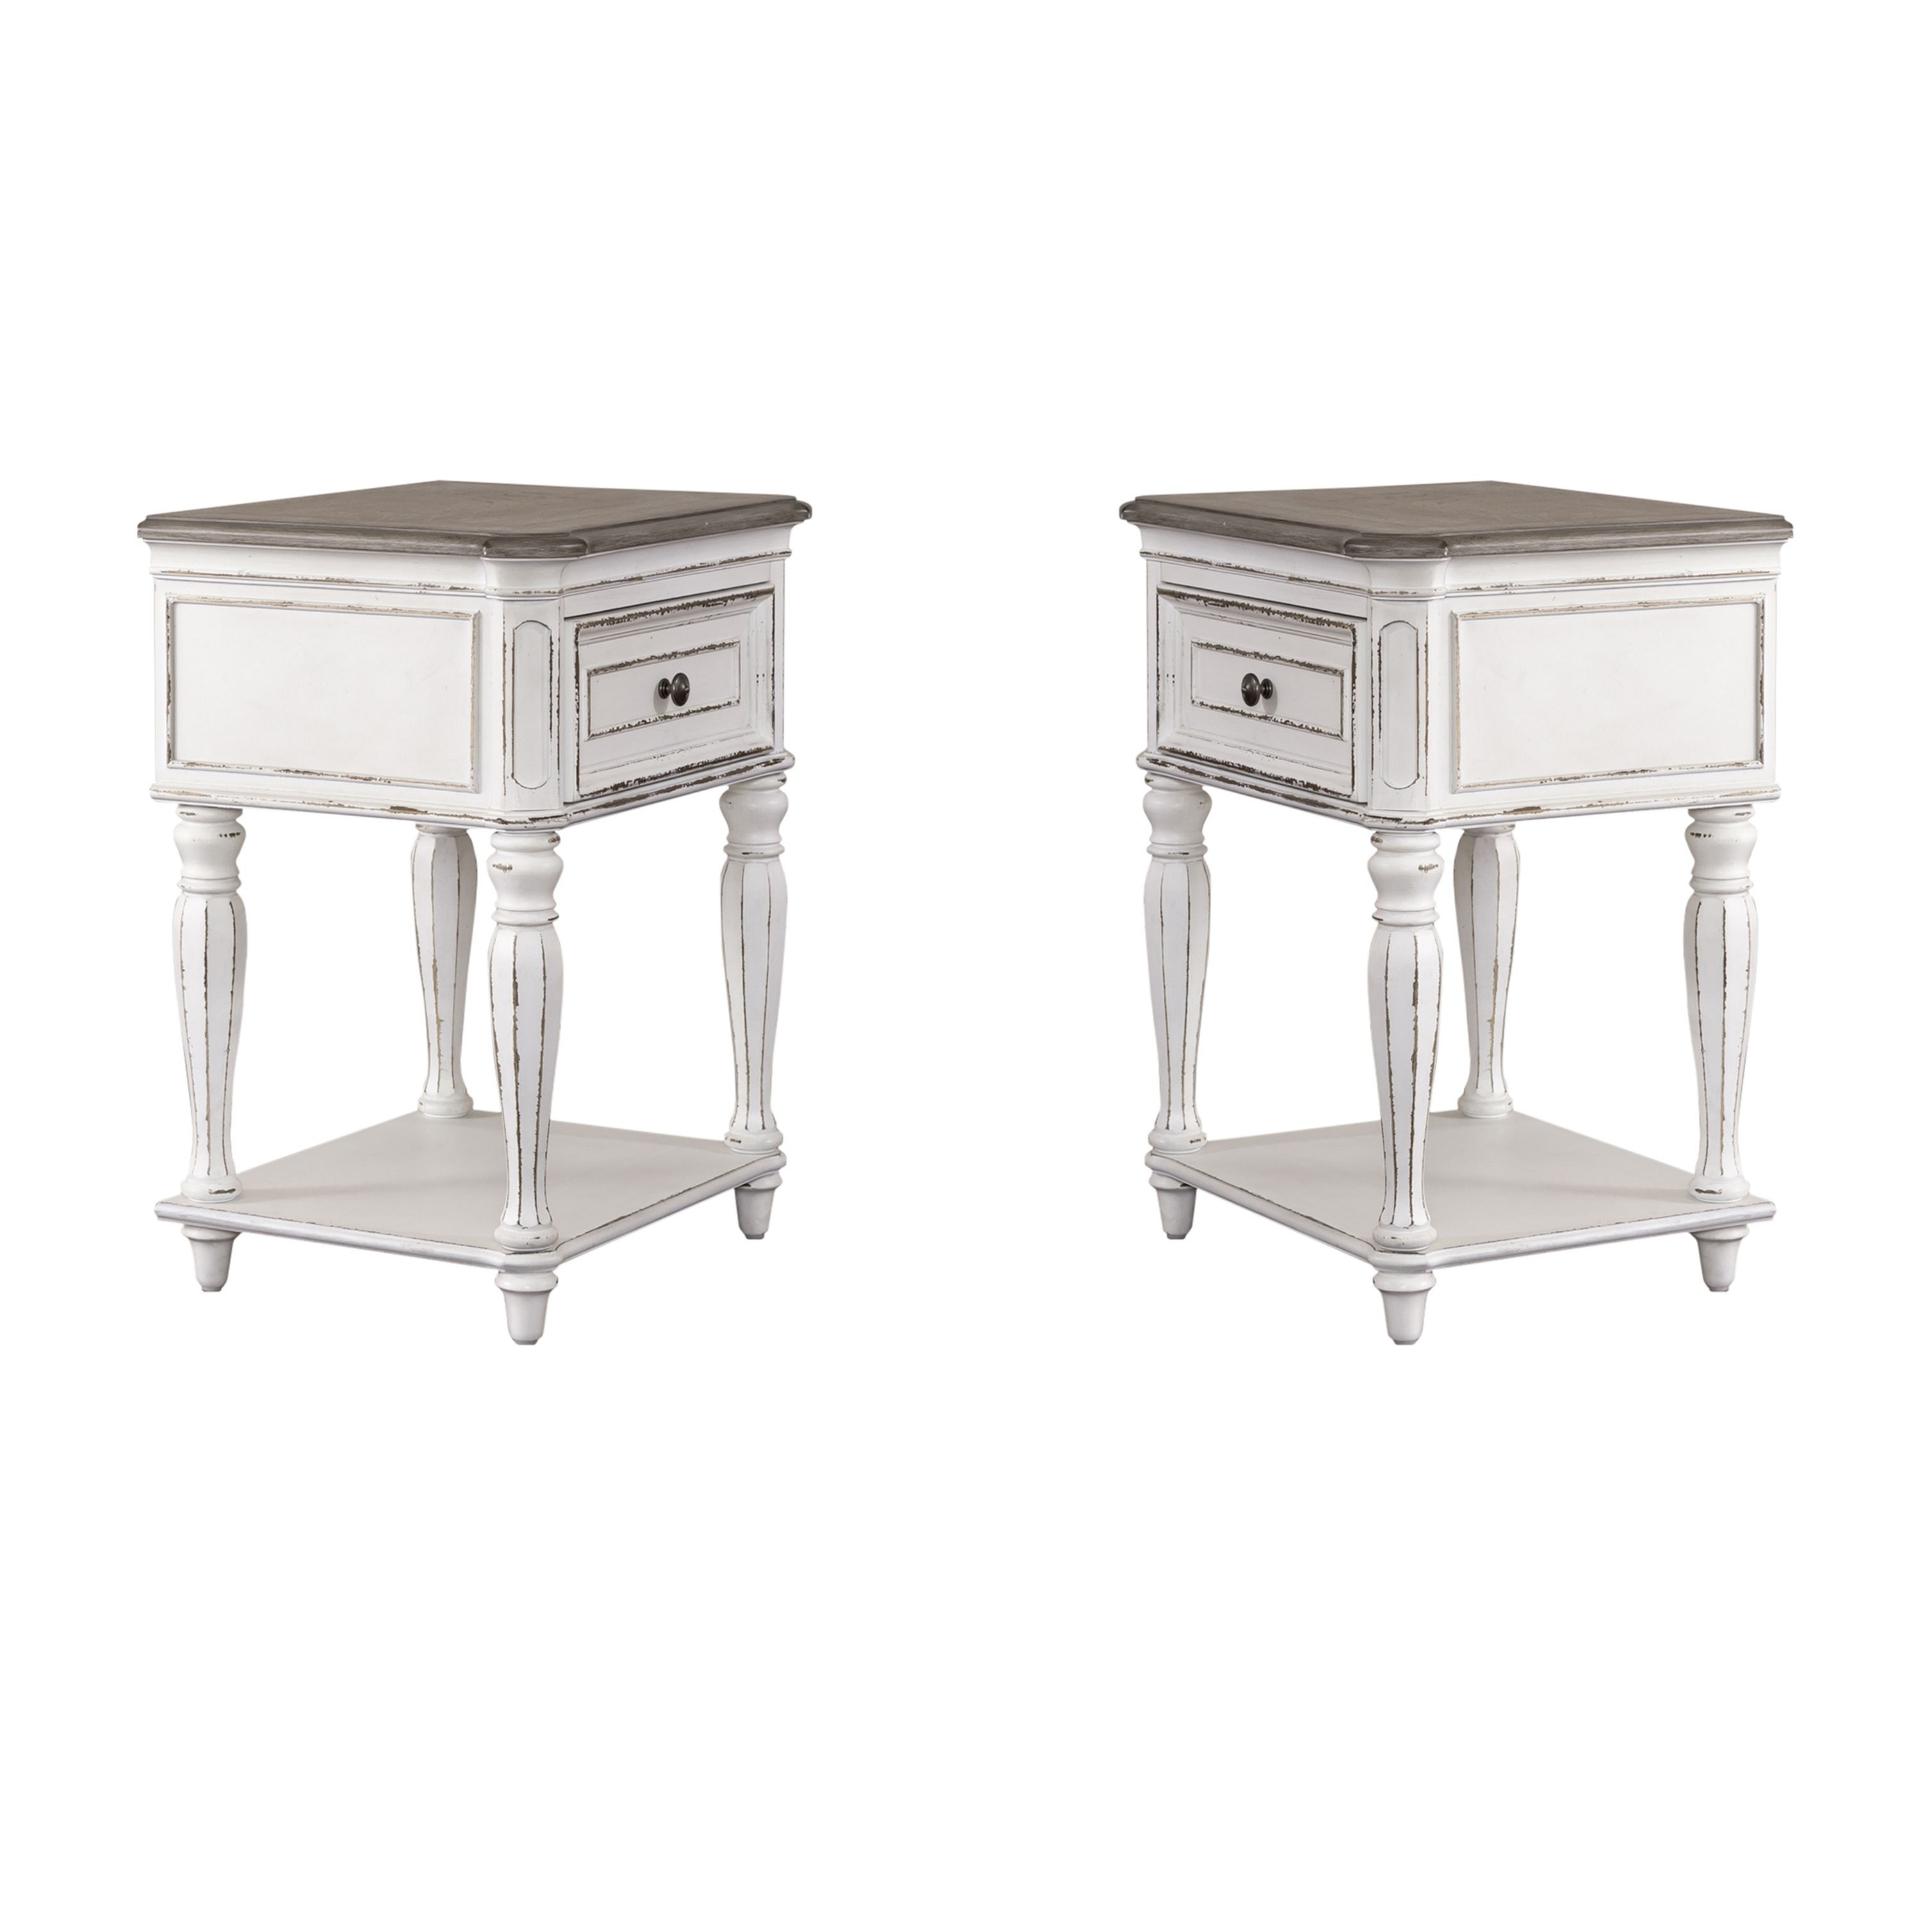 European Traditional Nightstand Set Magnolia Manor  (244-BR) Nightstand 244-BR63-Set-2 in White 